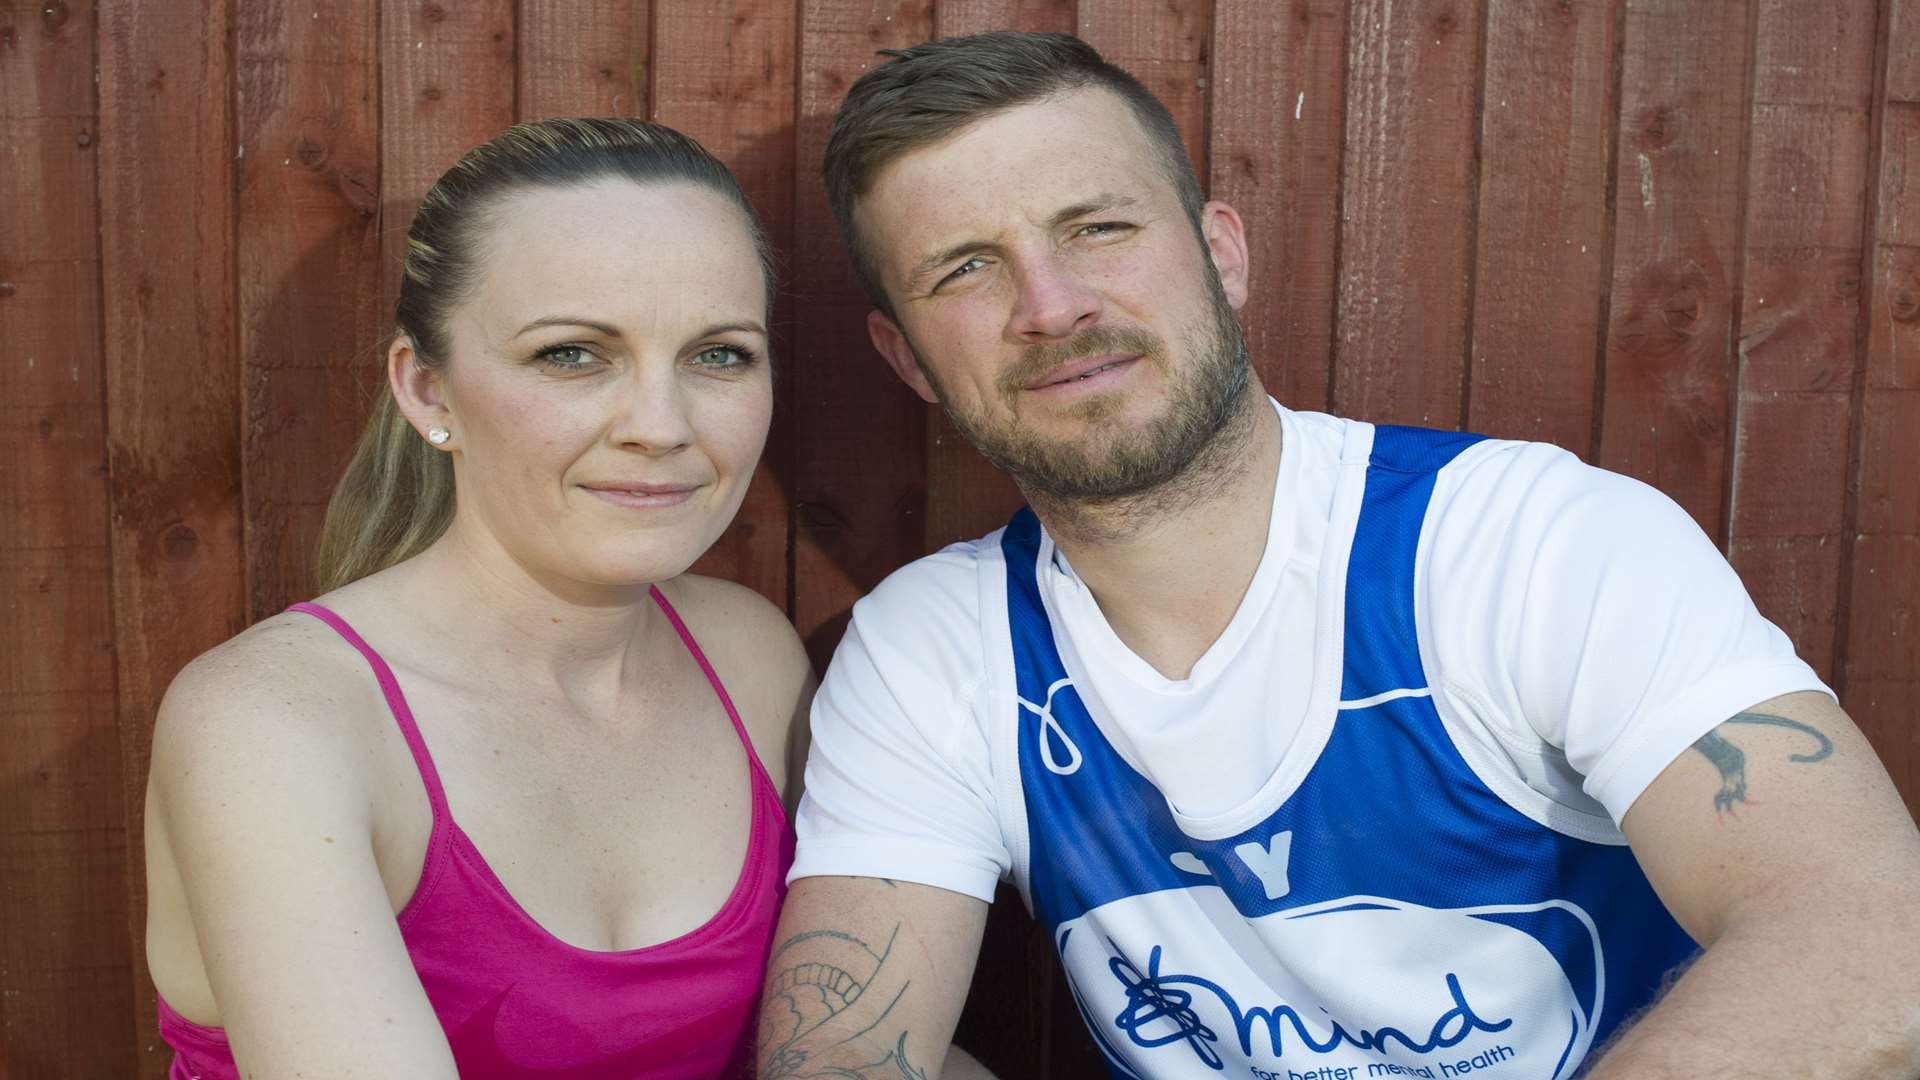 Jamie Davies, of Collis Street, Strood, had mental health issues and is running a 10k race in May for charity Mind. Pictured with his wife Lindsay.